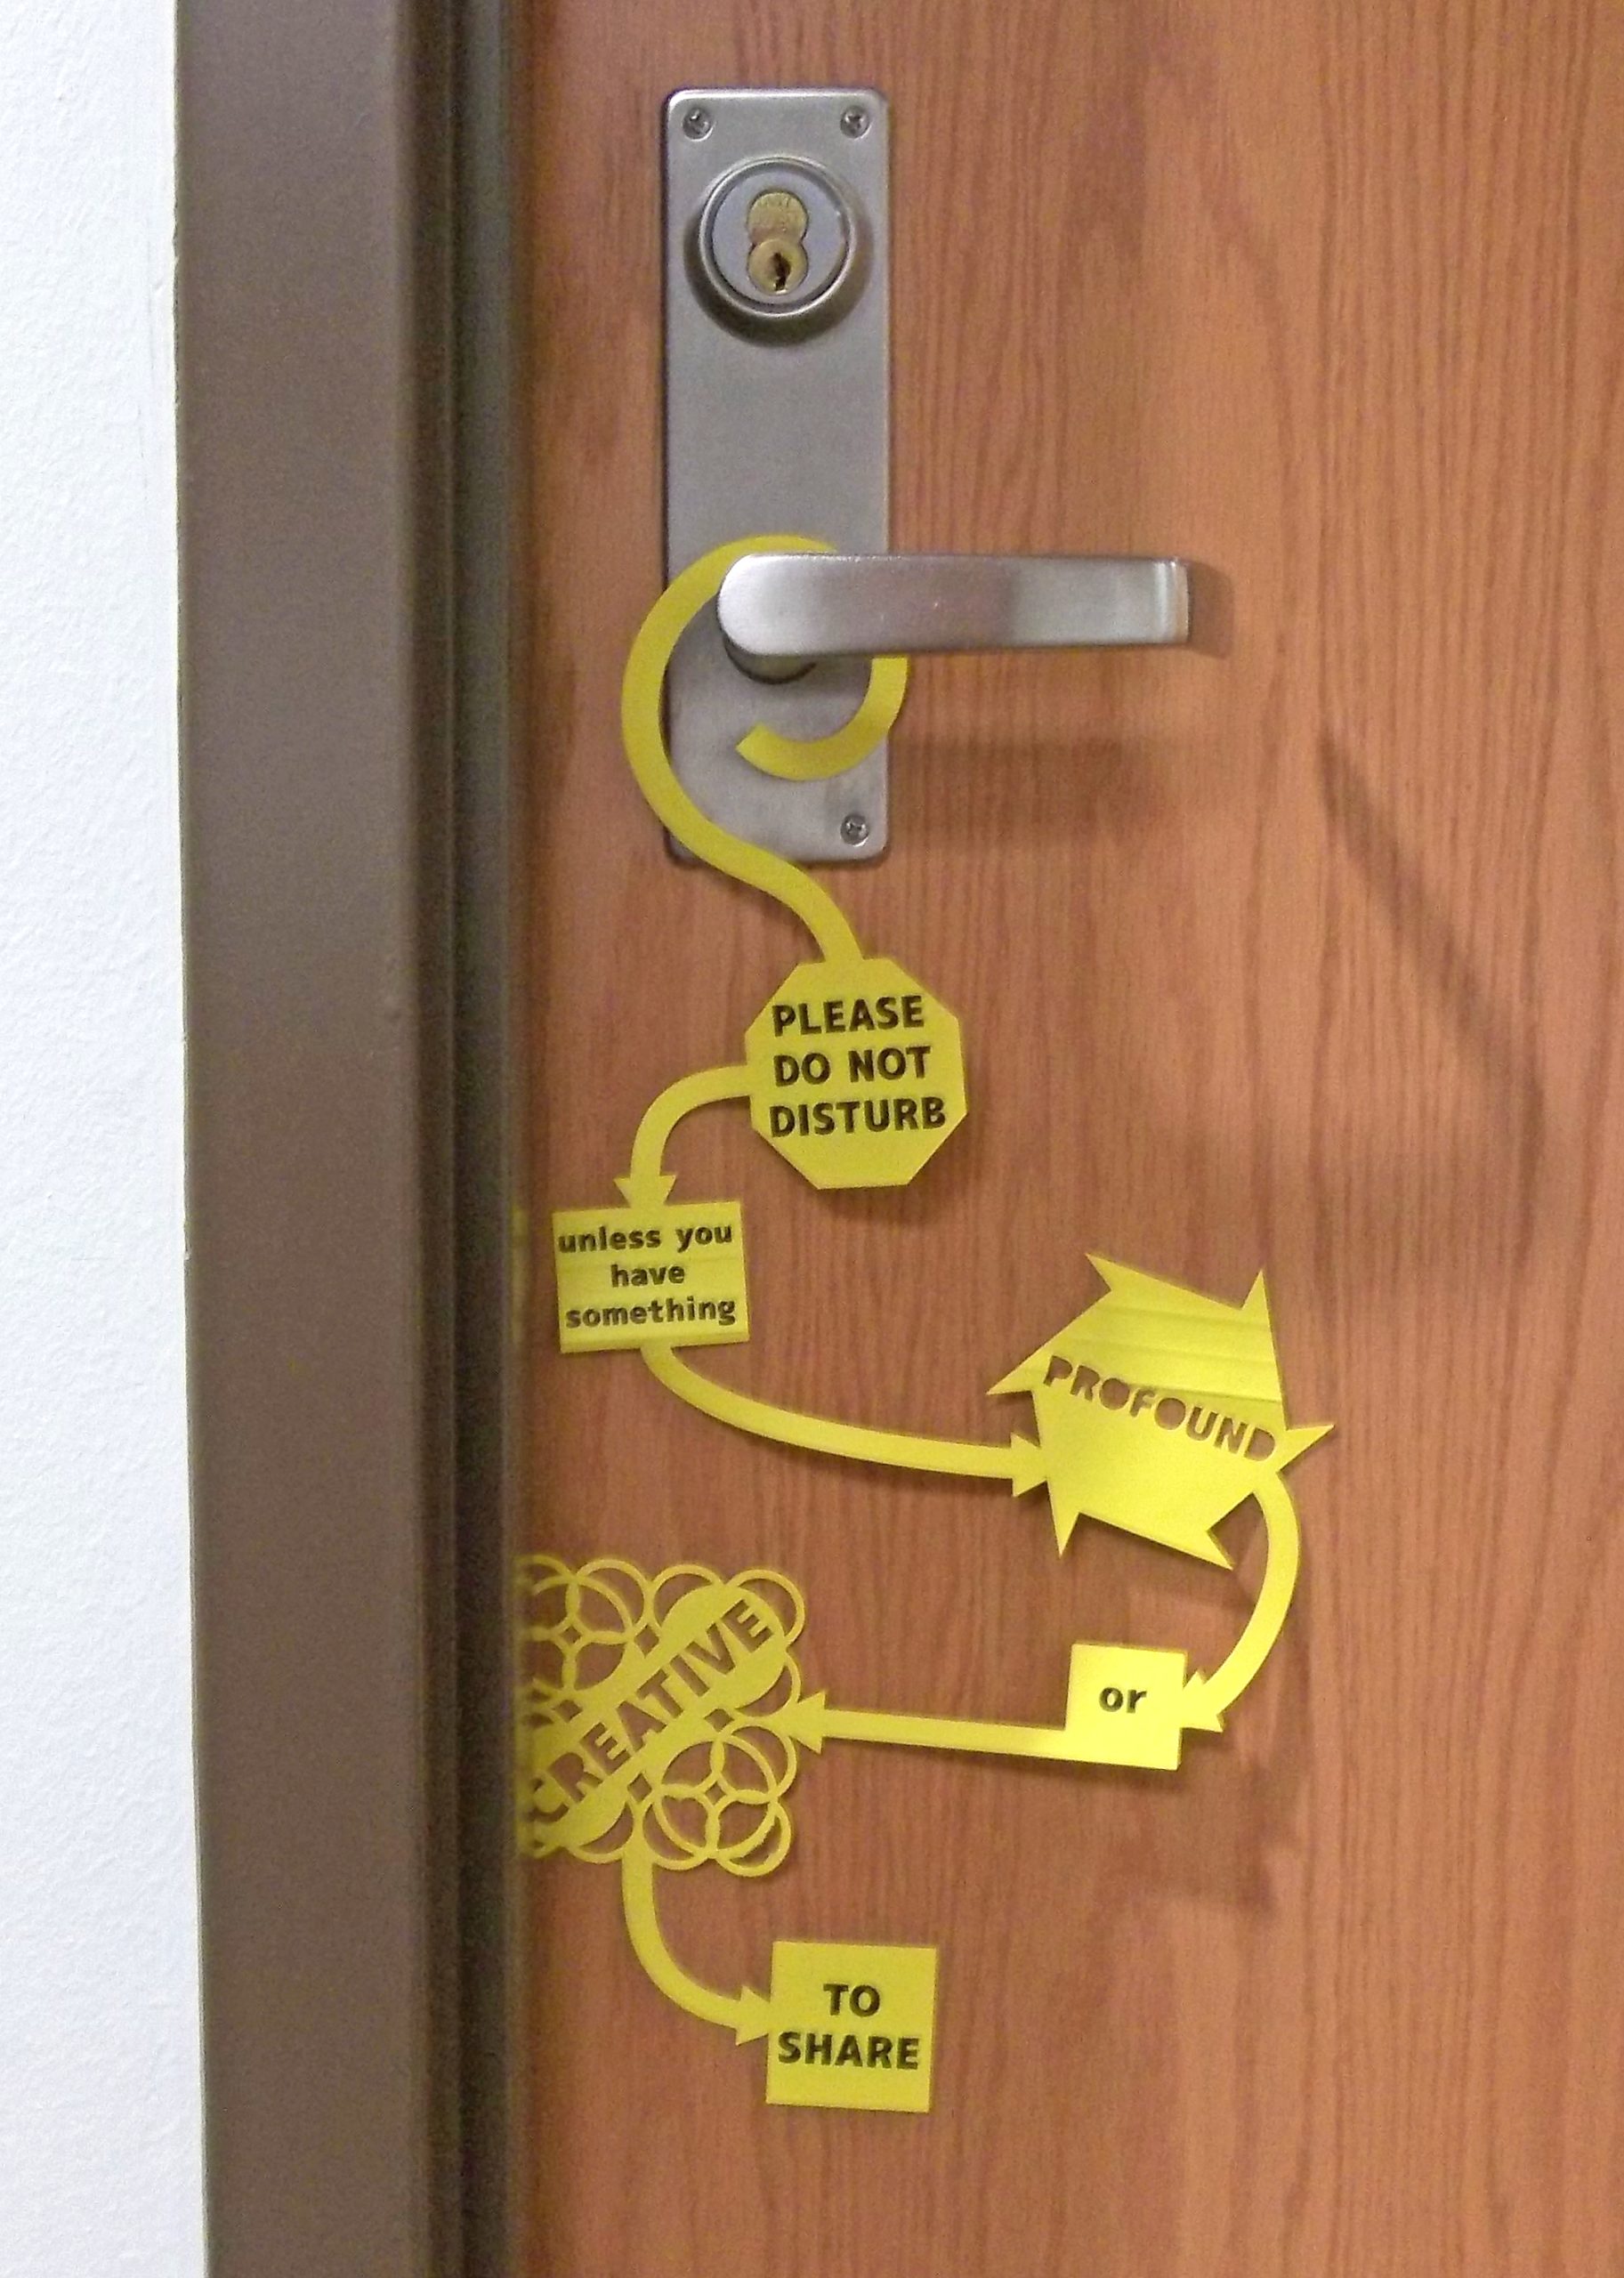 custom door hanger with text "Do not disturb unless you have something profound of creative to share."